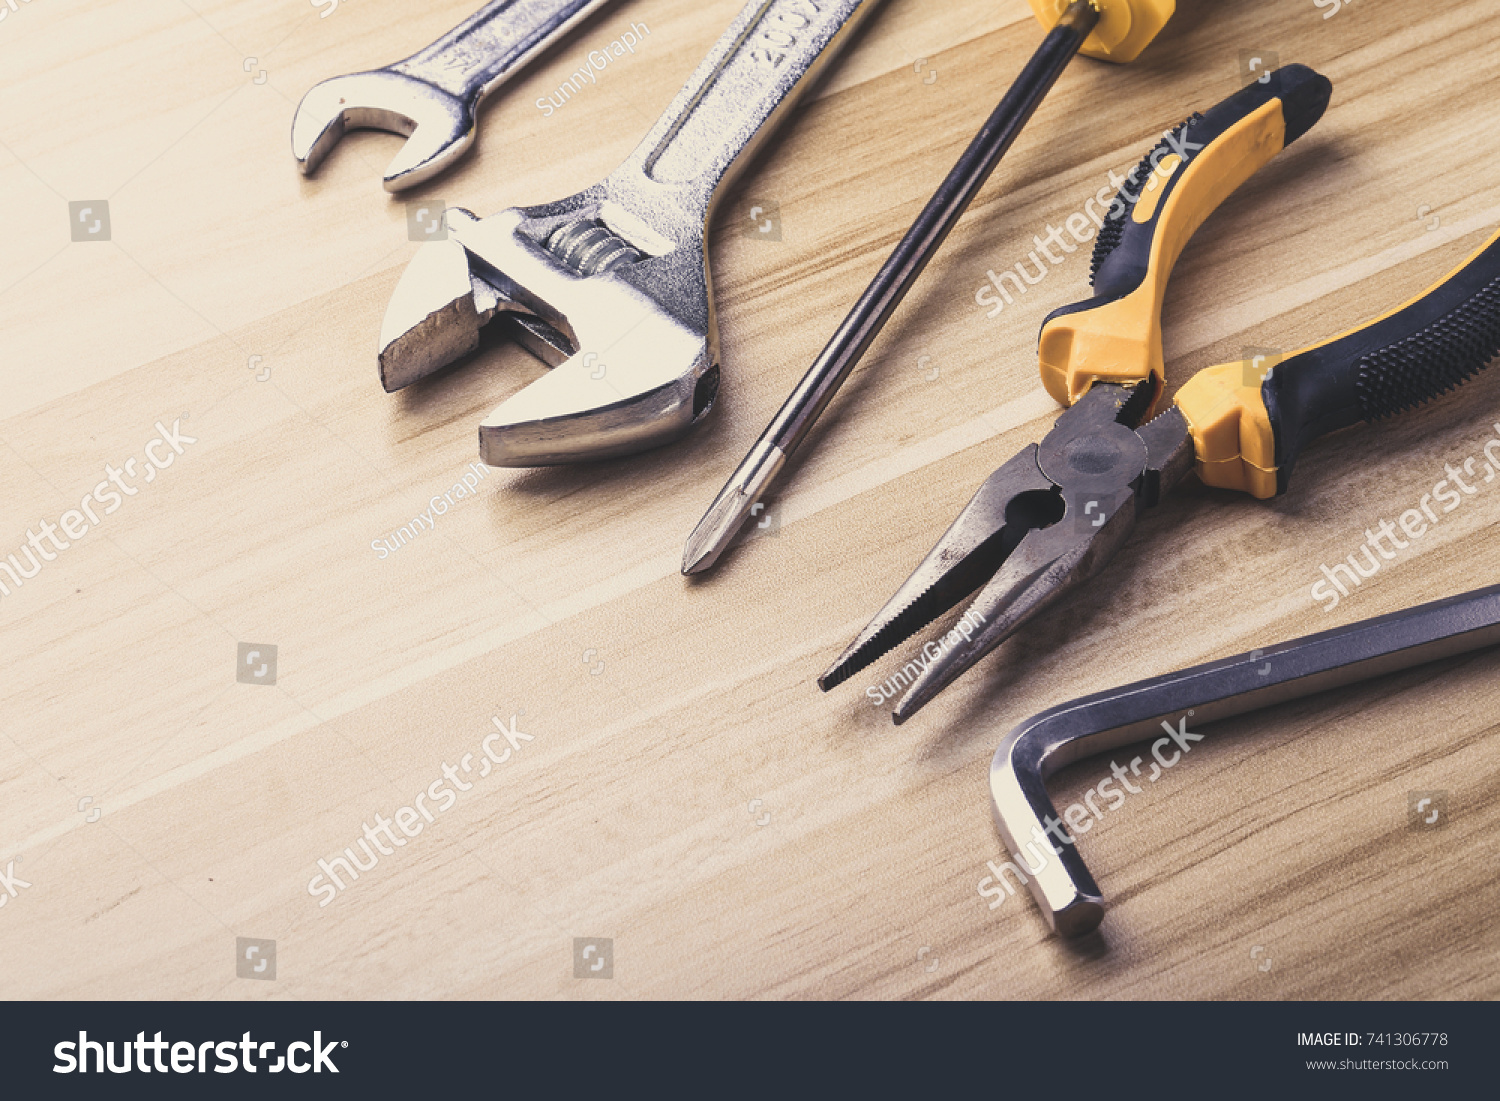 Set of different tools #741306778